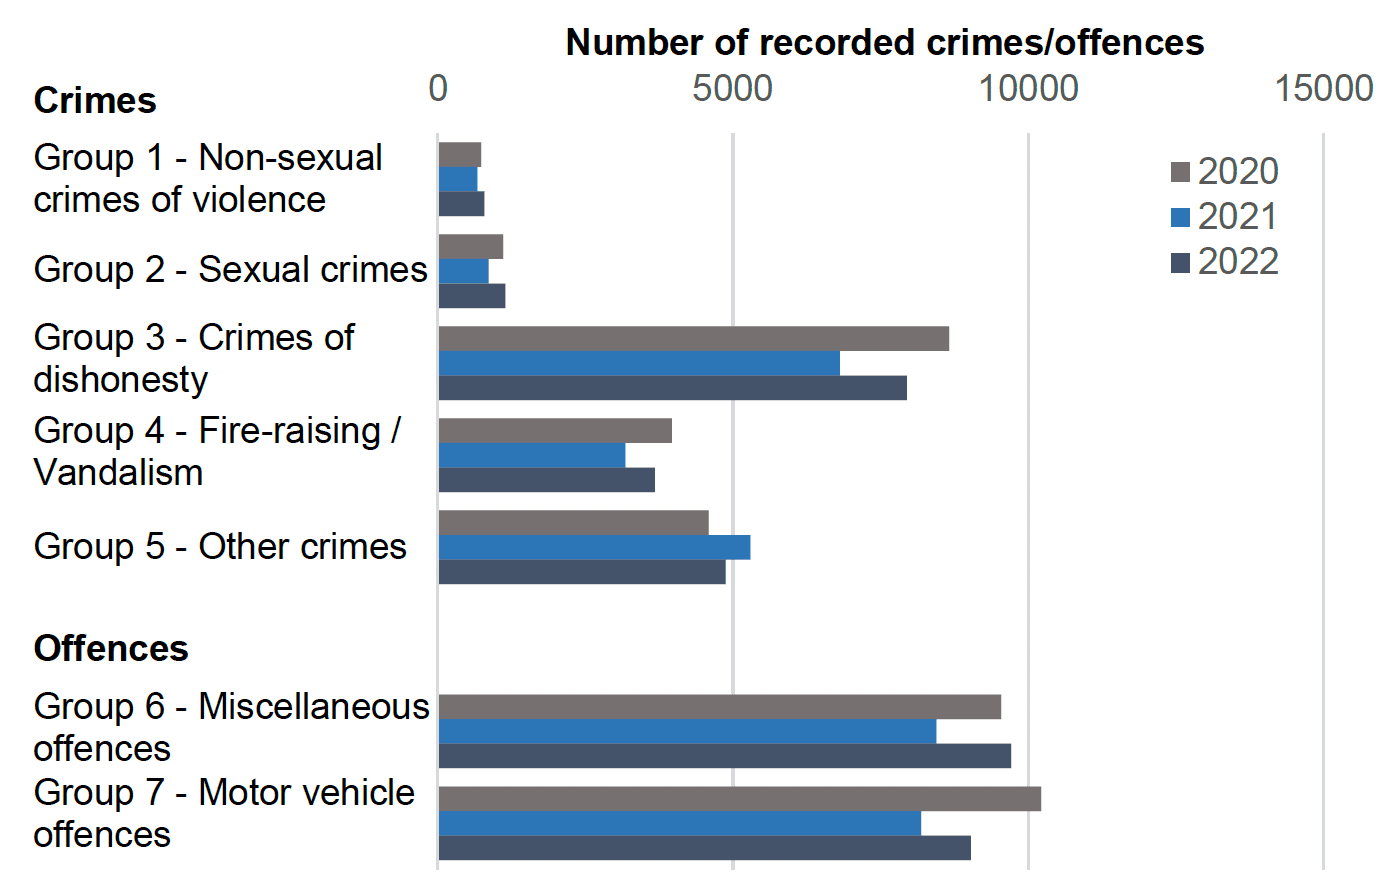 Bar chart showing crime and offence group levels recorded in February 2020, 2021 and 2022.